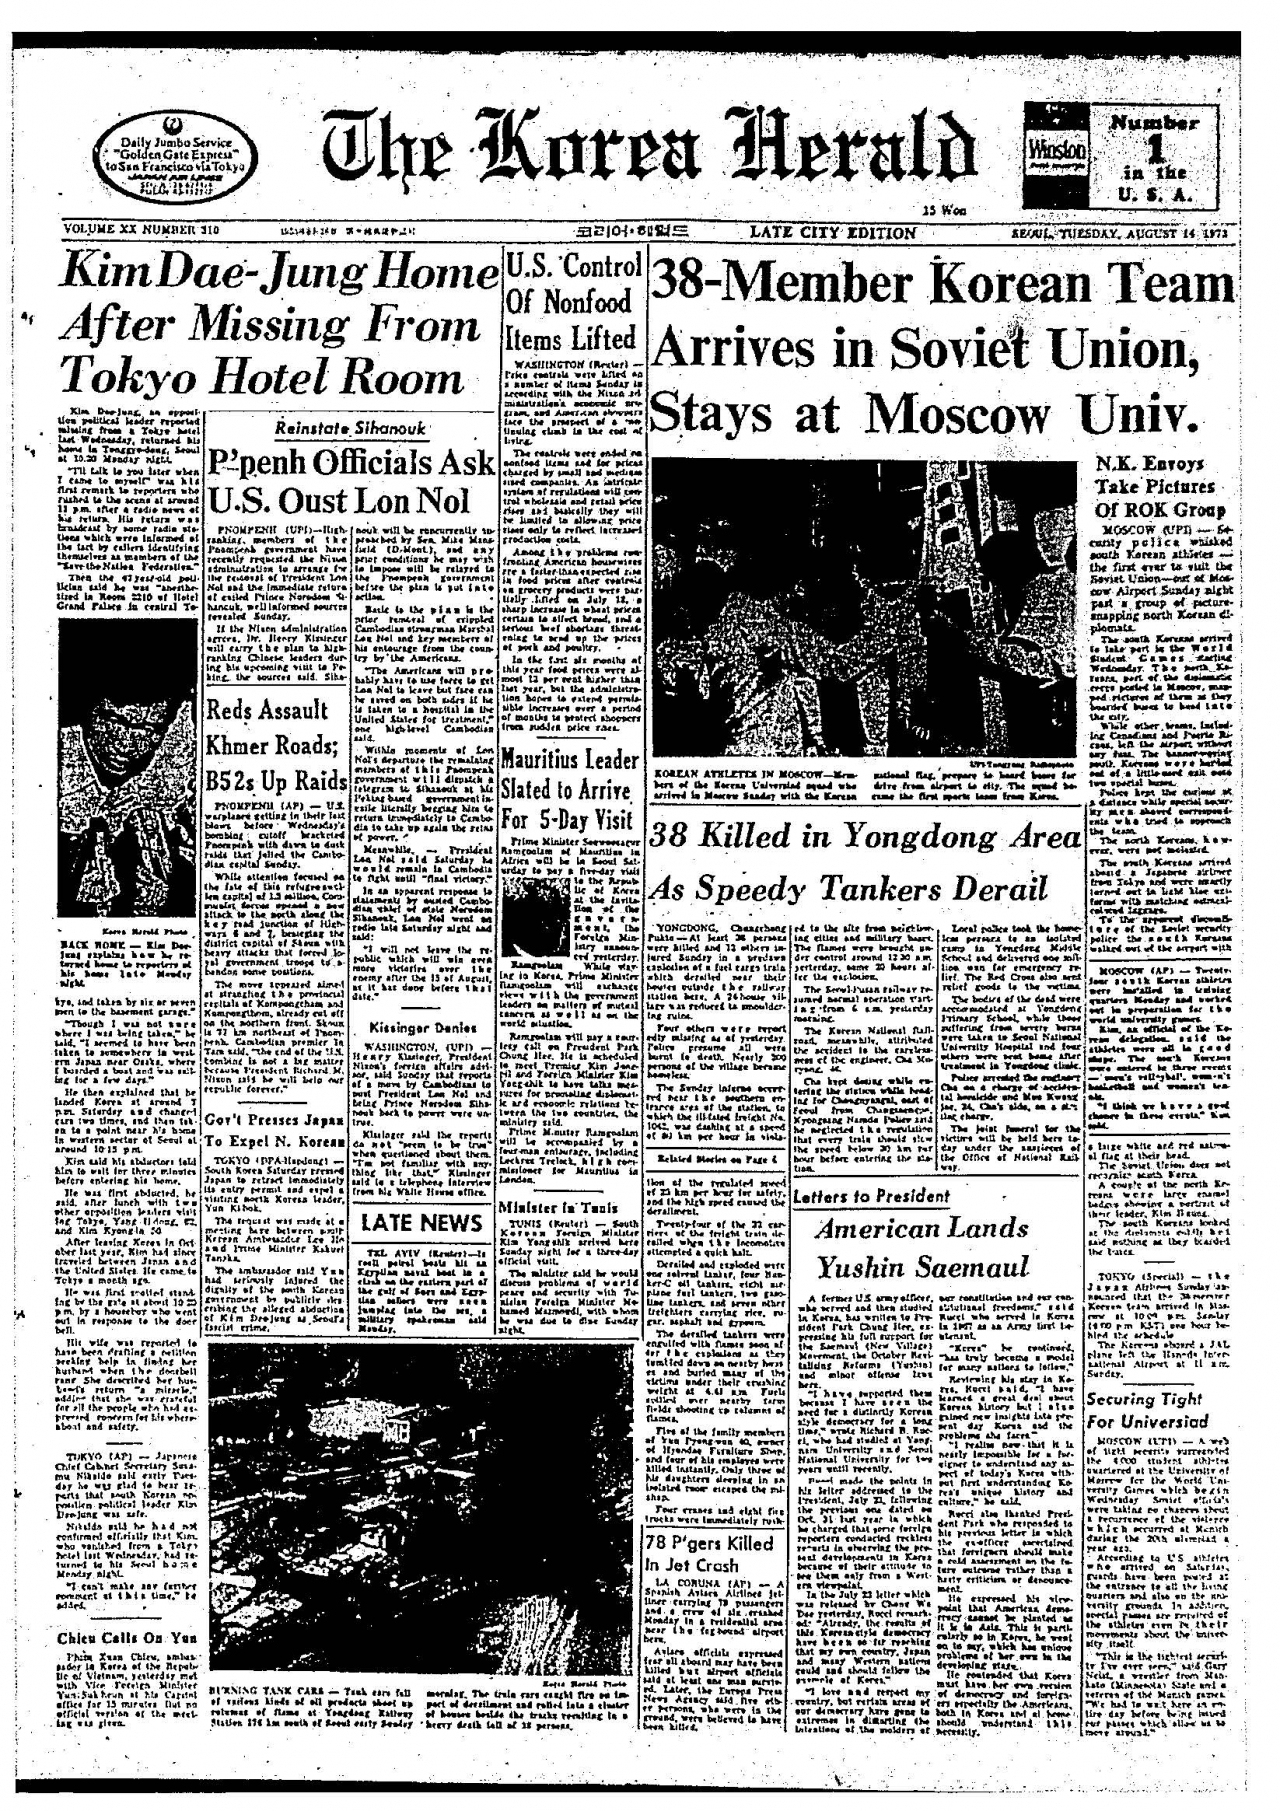 The front page of The Korea Herald's Aug. 14, 1973 edition